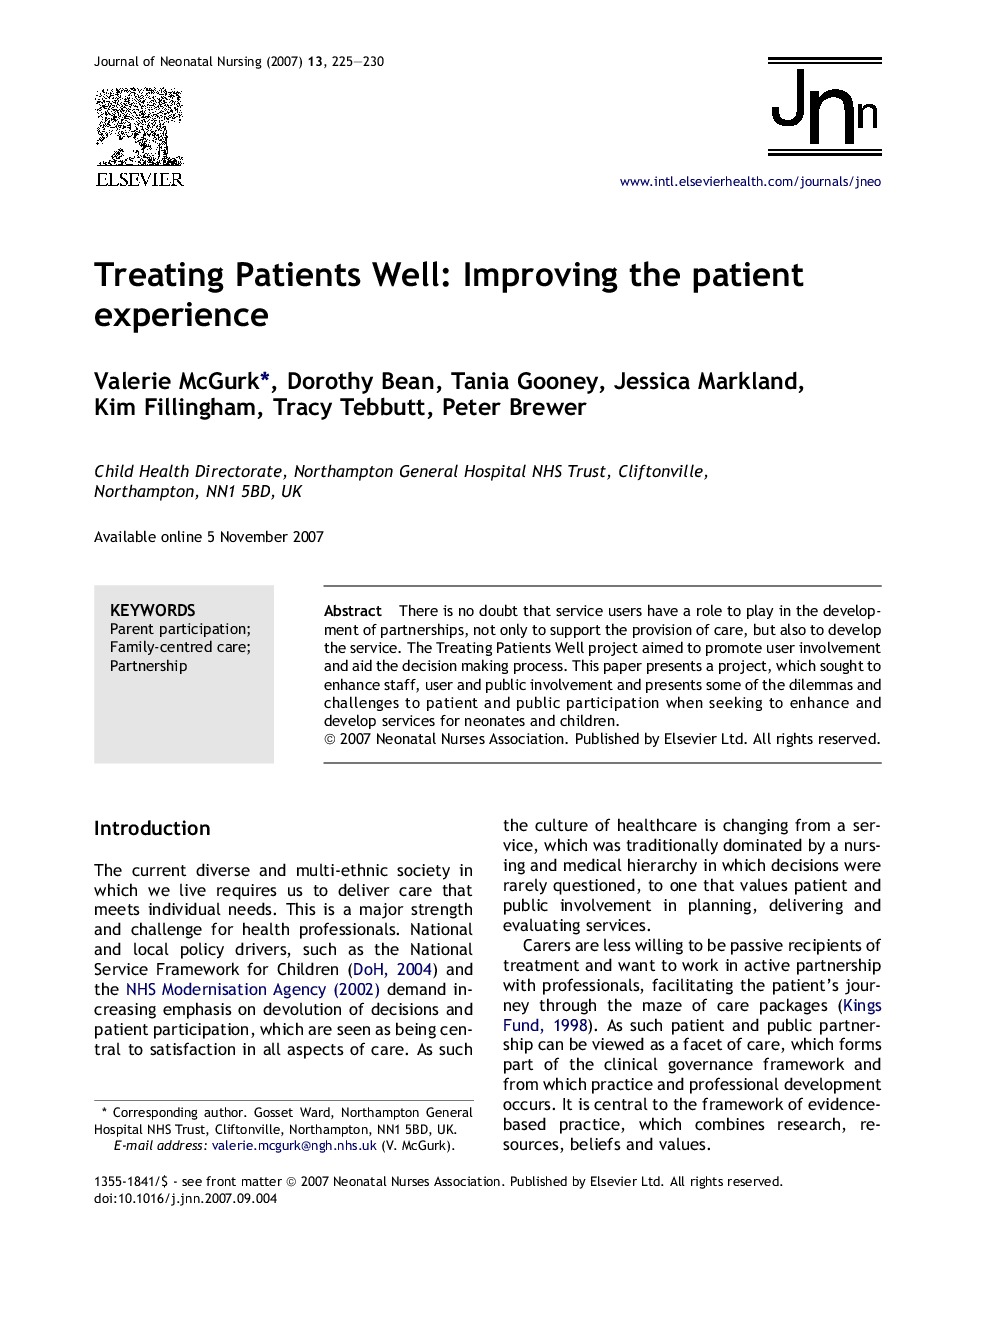 Treating Patients Well: Improving the patient experience